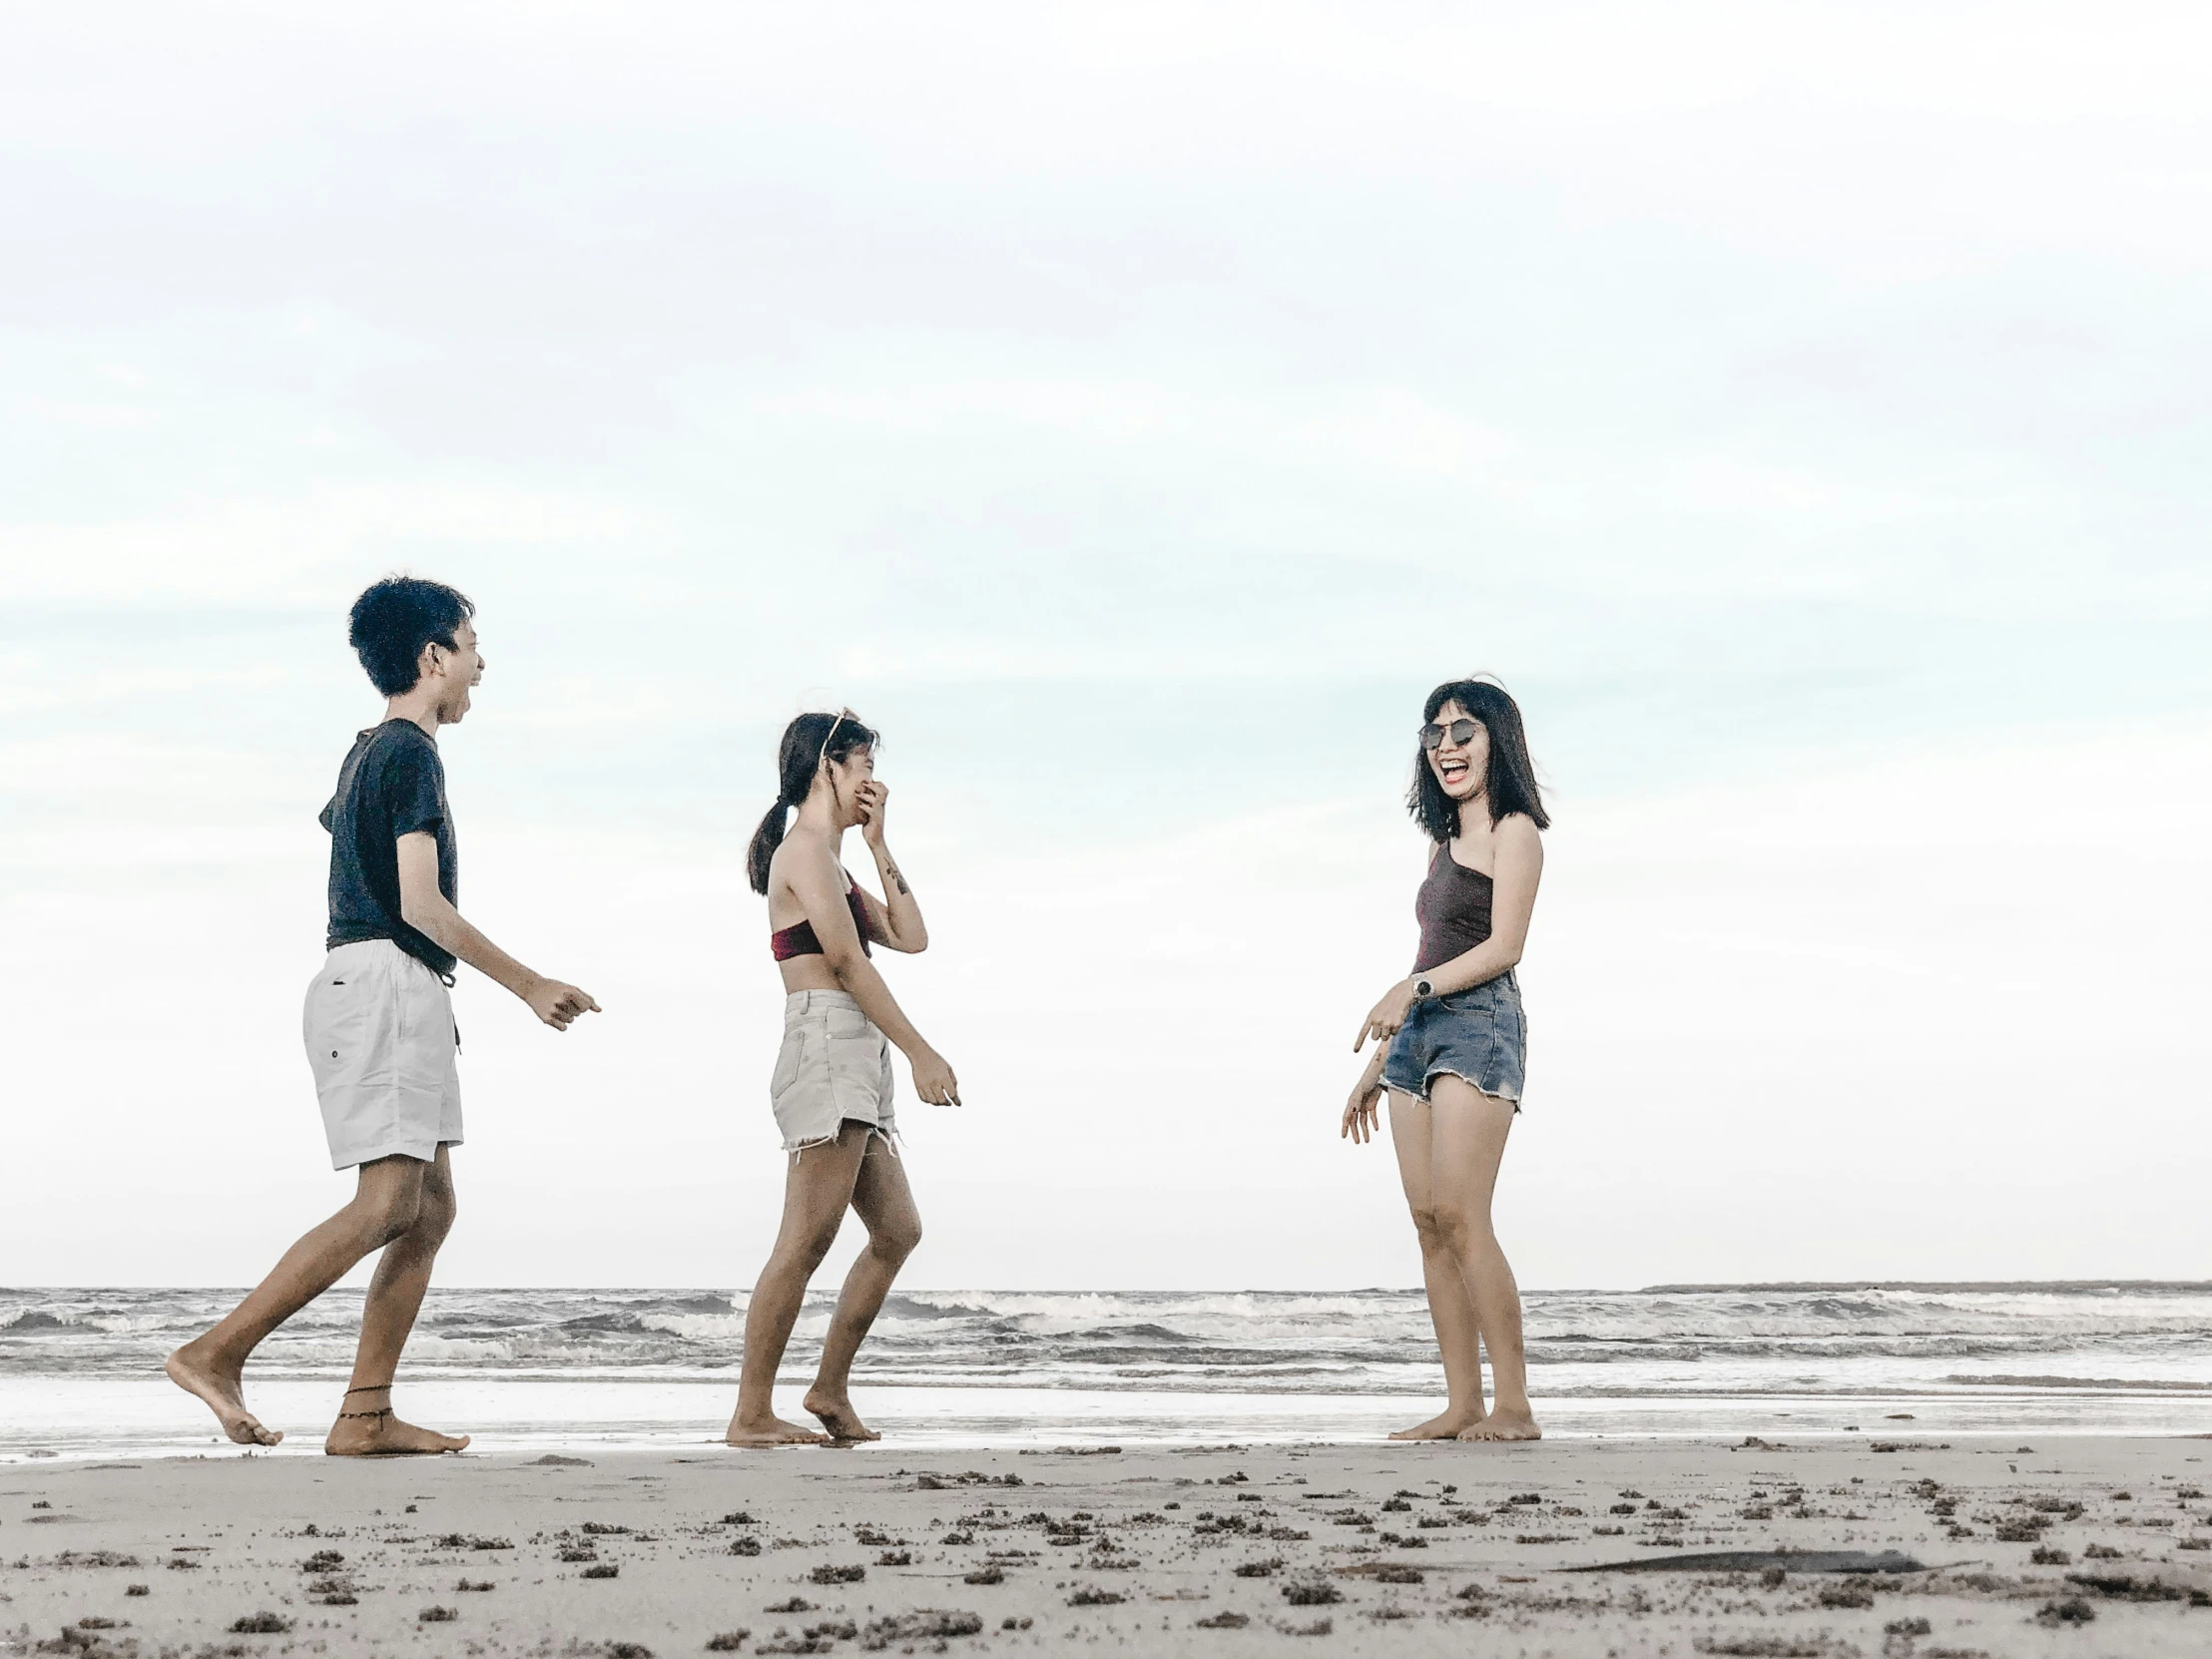 three young people standing on the beach by a body of water